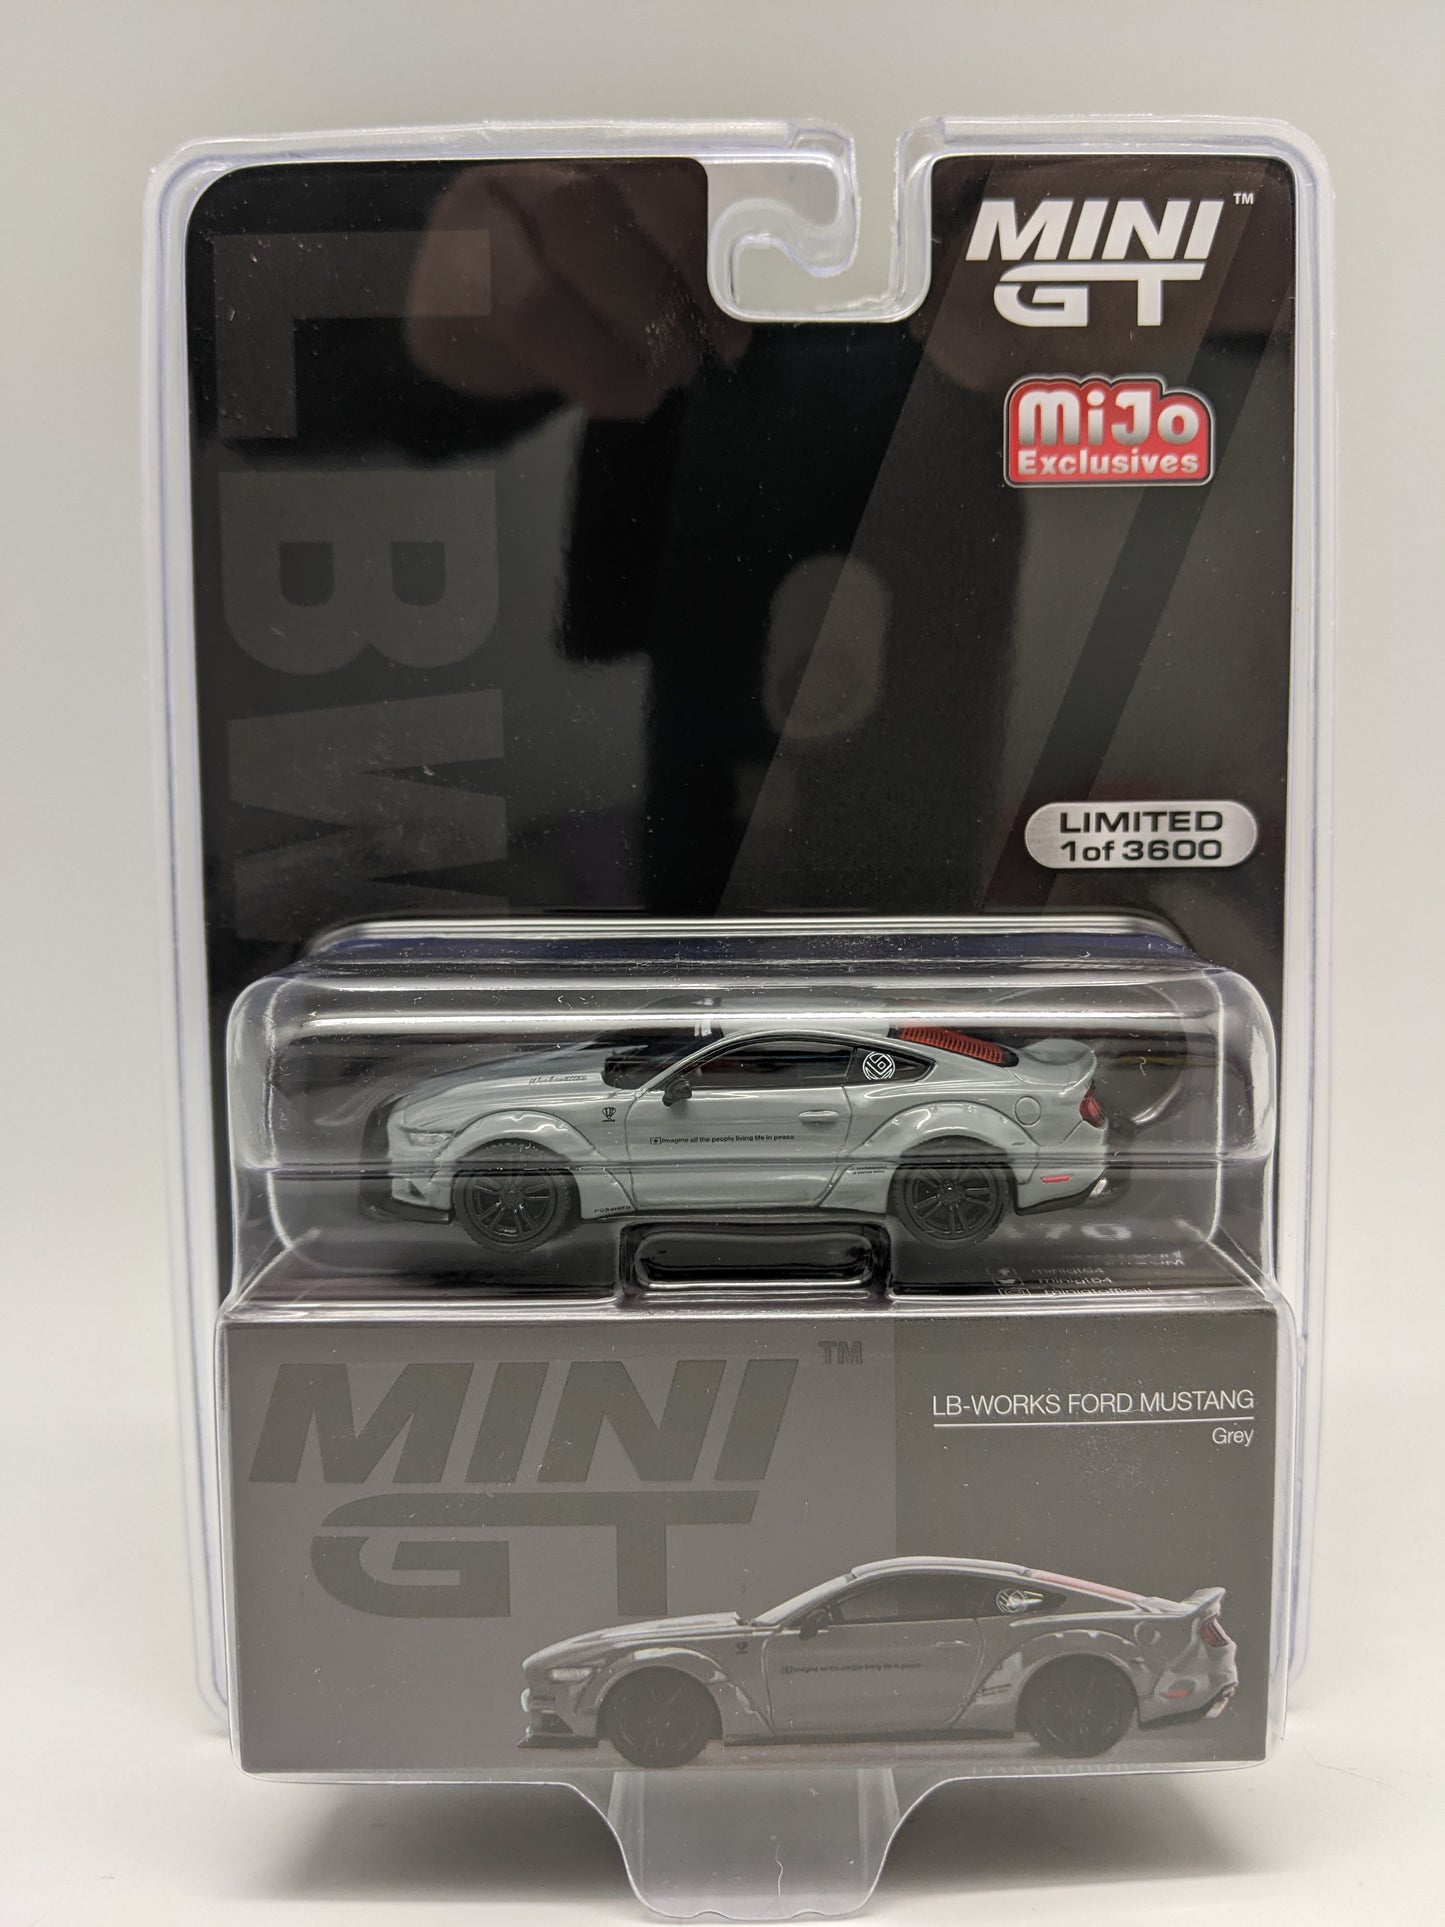 Mini GT 0470 - LB Works Ford Mustang - GREY